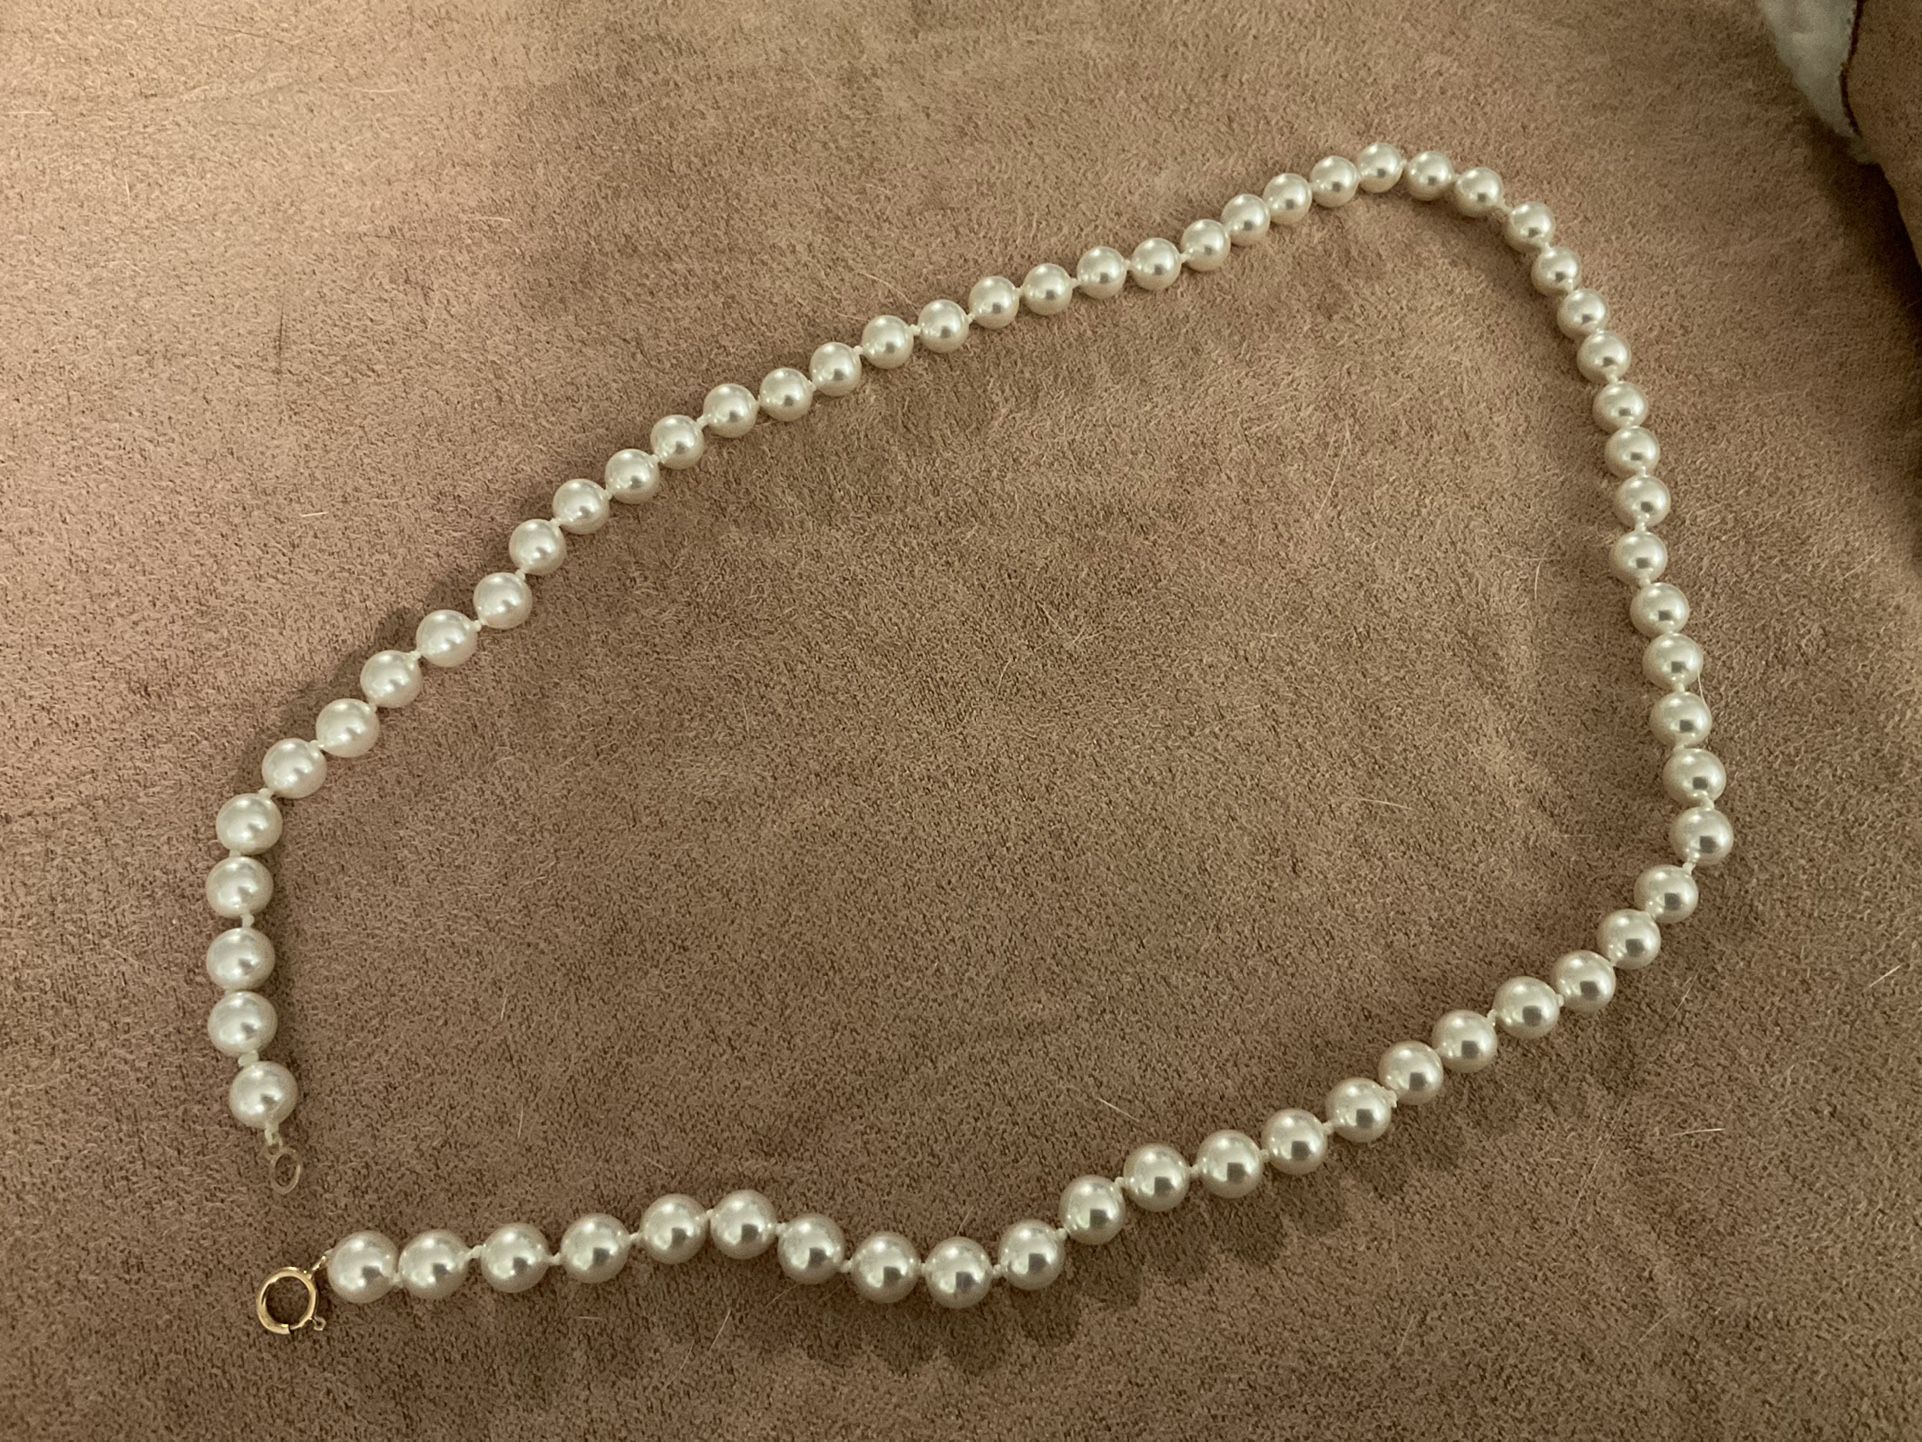  Imitation pearl Necklace 14kt Gold